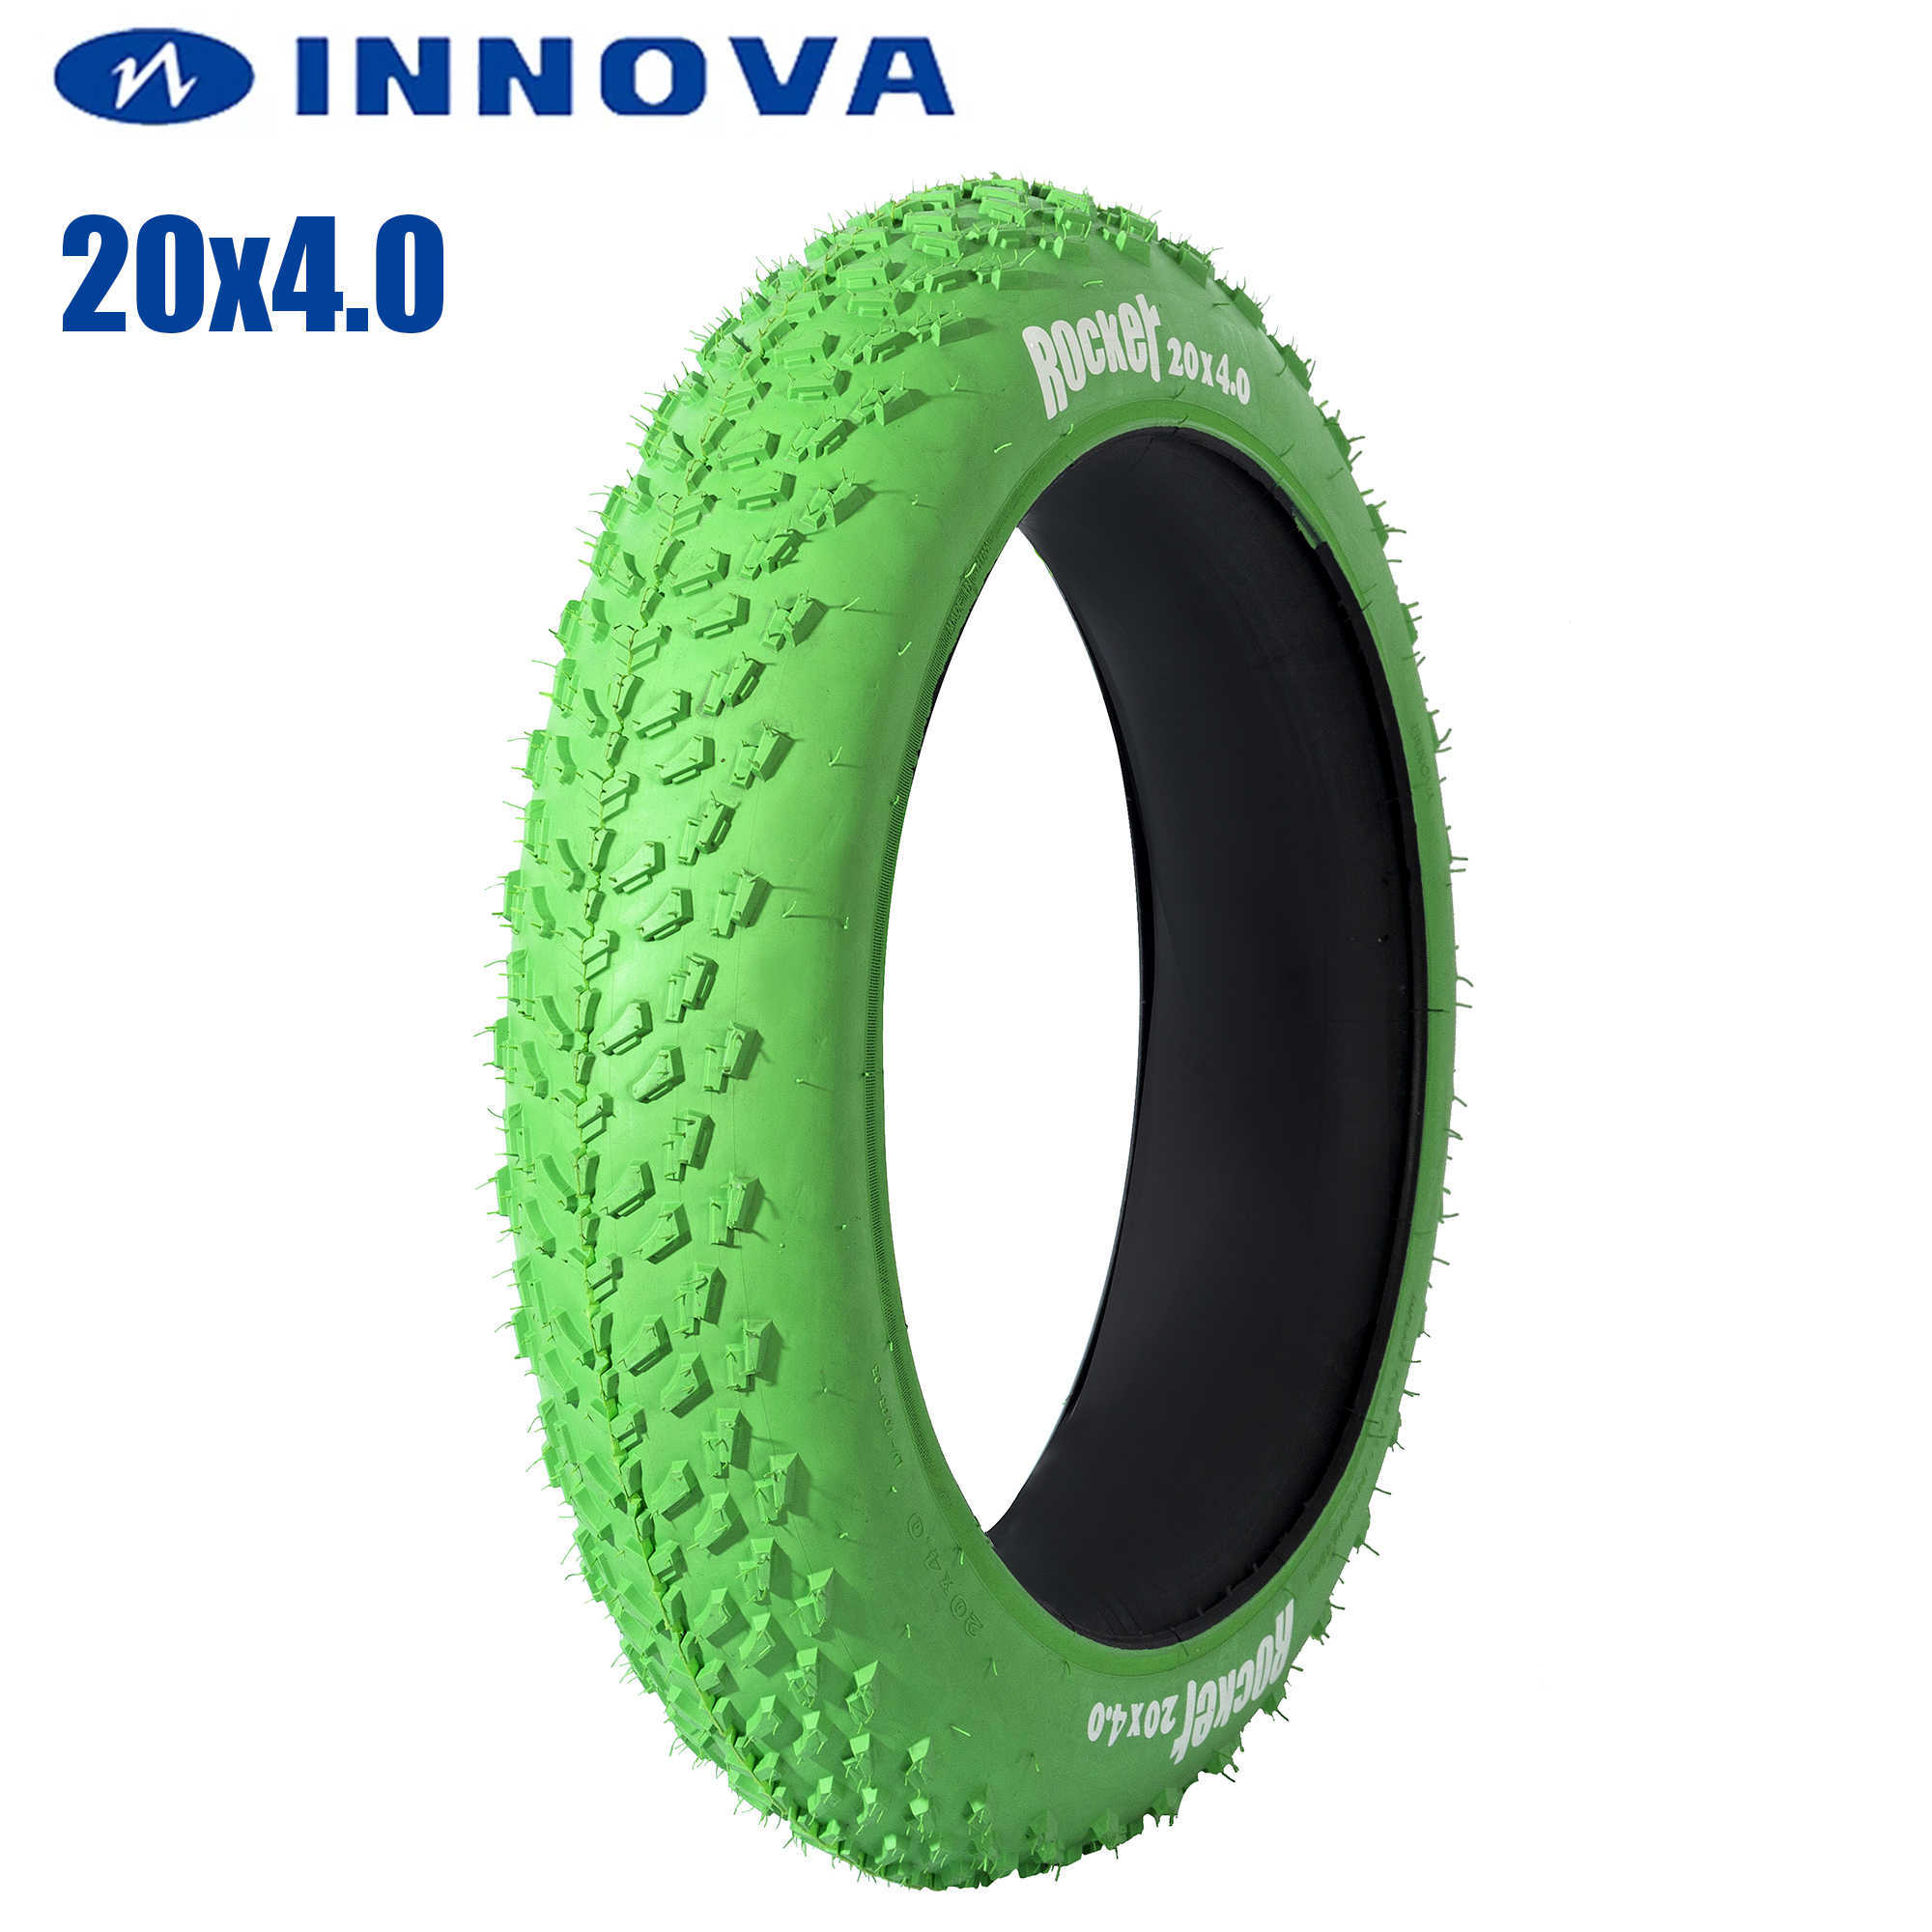 s INNOVA 20x4.0 Electric Bicycle Tire MTB Tyre Beach 20*4.0 City Fat Tyres Snow Mountain Bike Parts 0213